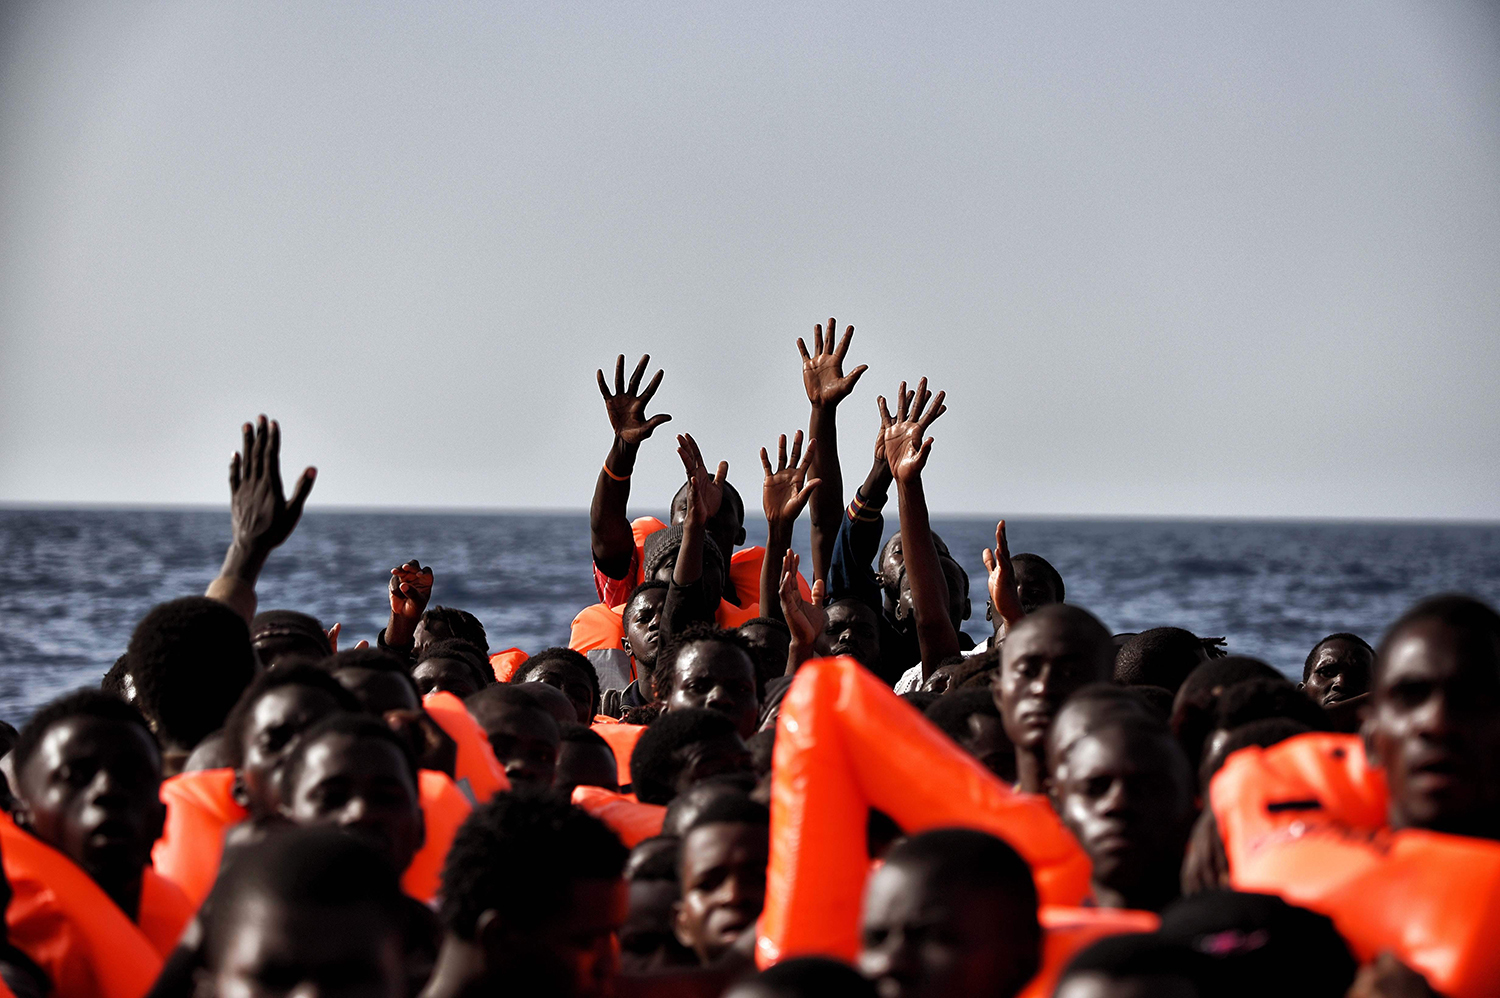 Migrants wait to be rescued in the mediteranean sea some 20 nautical miles north off the coast of Libya on October 3, 2016. / AFP PHOTO / ARIS MESSINIS / TT / kod 444